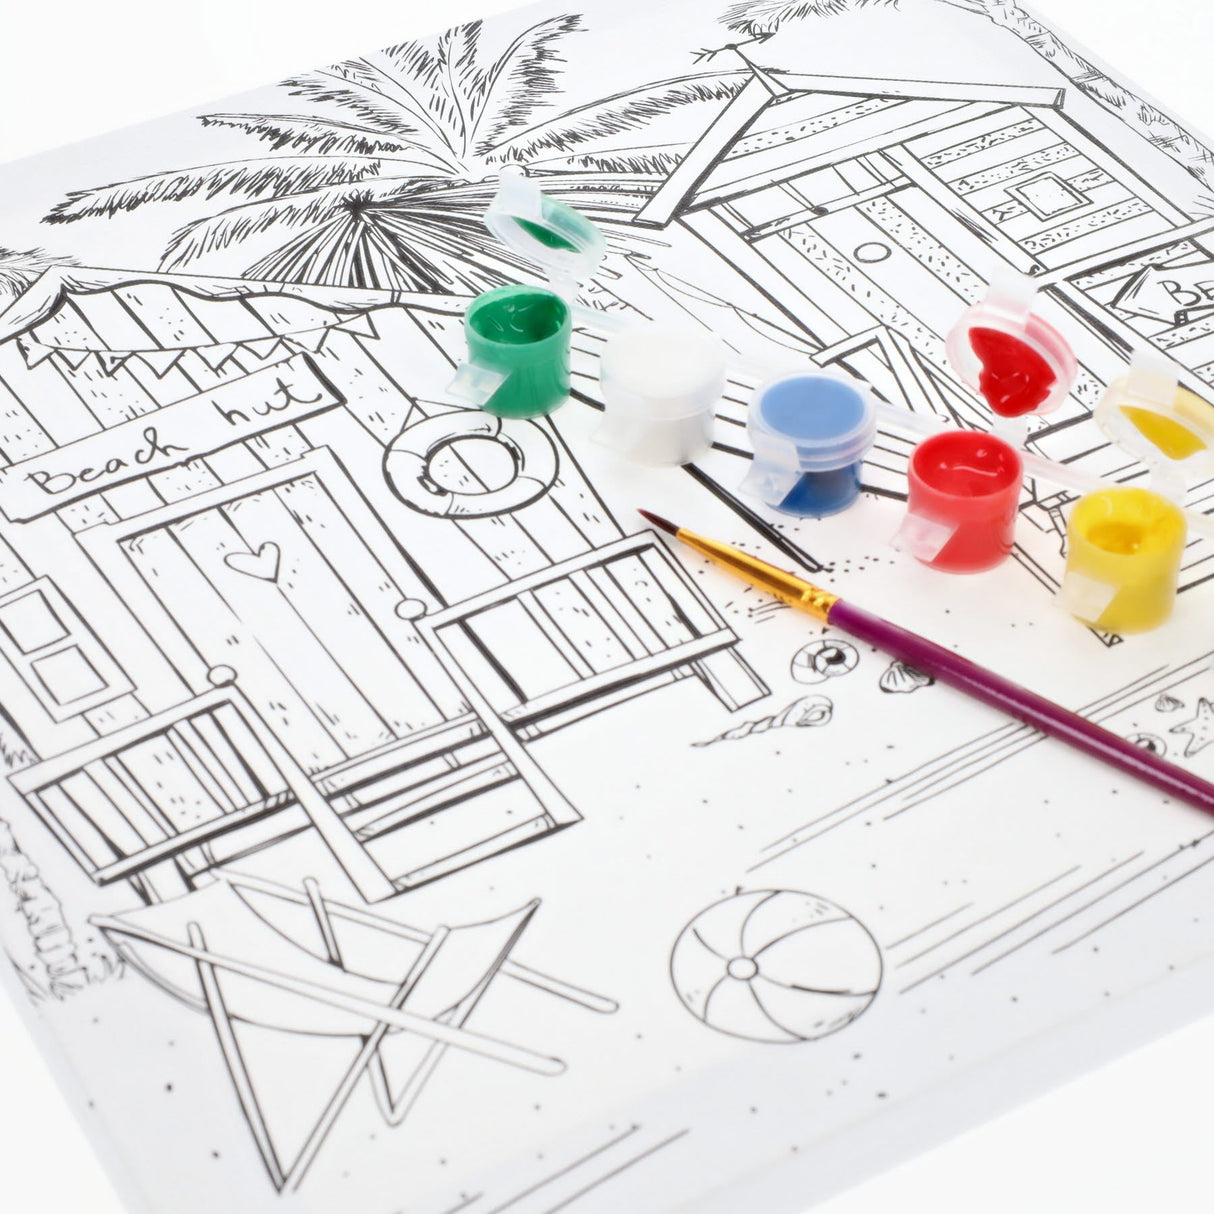 Icon Colour My Canvas - 300x300mm - Beach Hut-Colour-in Canvas-Icon|StationeryShop.co.uk